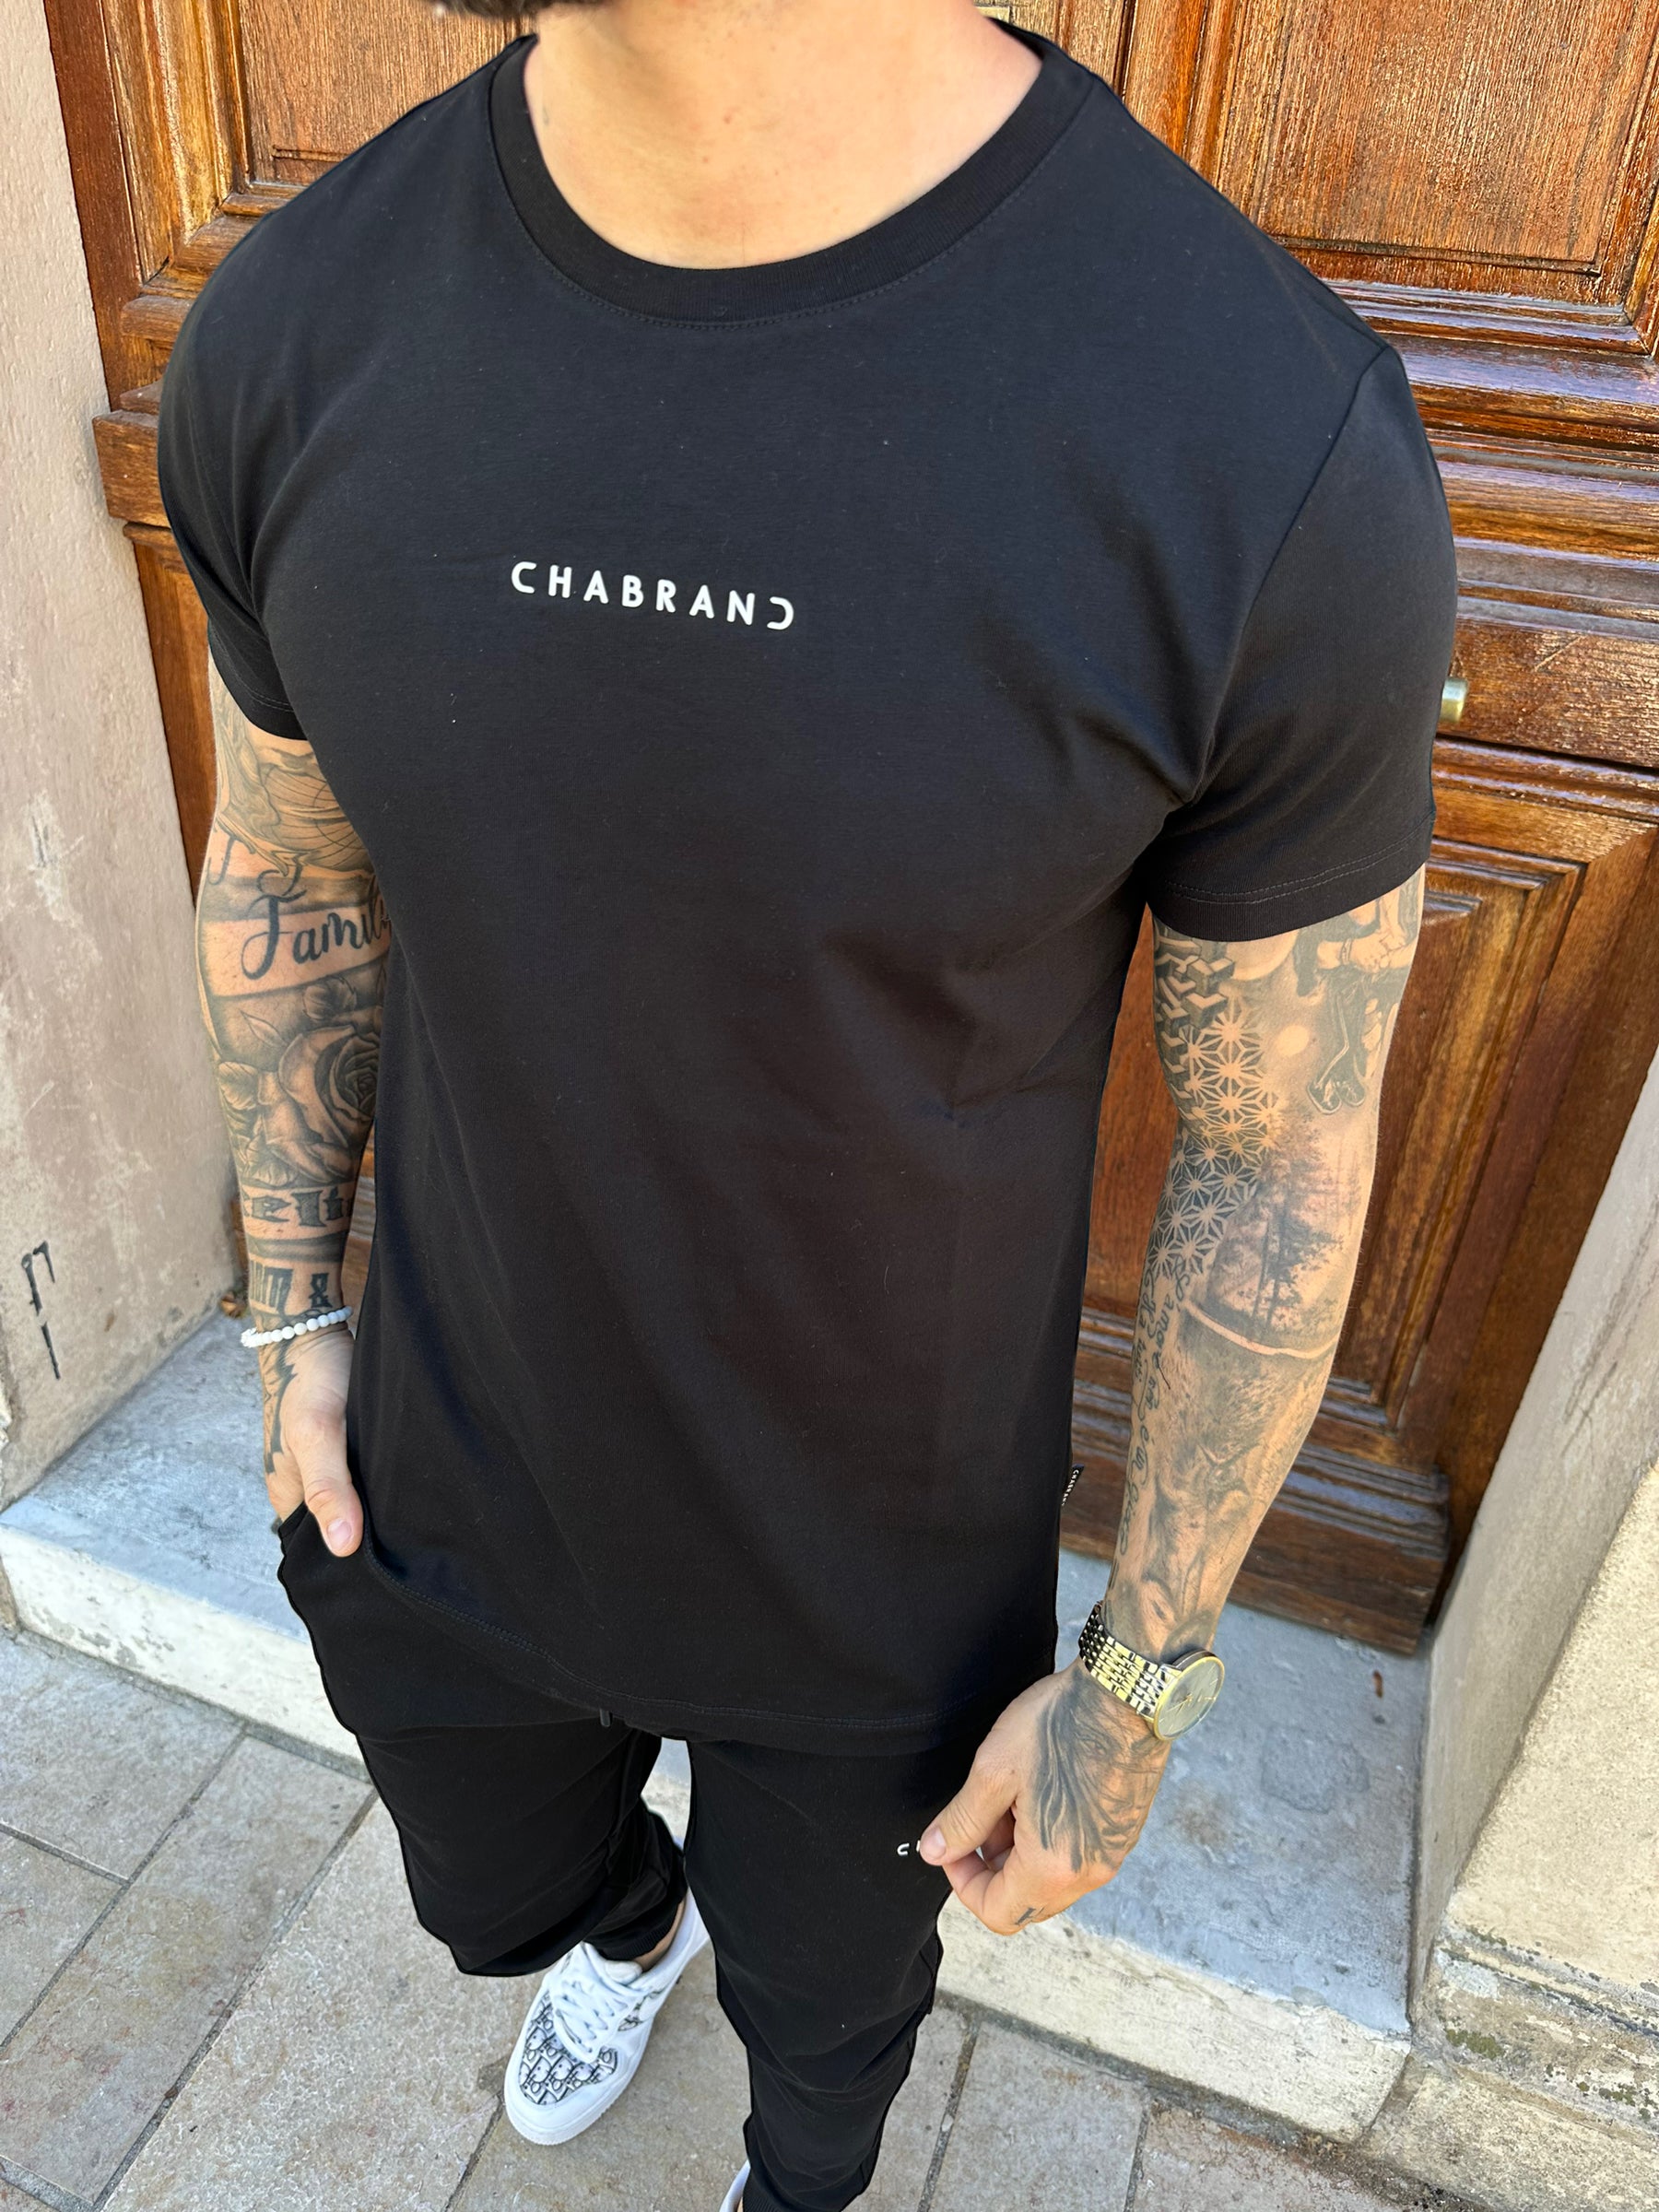 CHABRAND - Black t-shirt with mini white sign